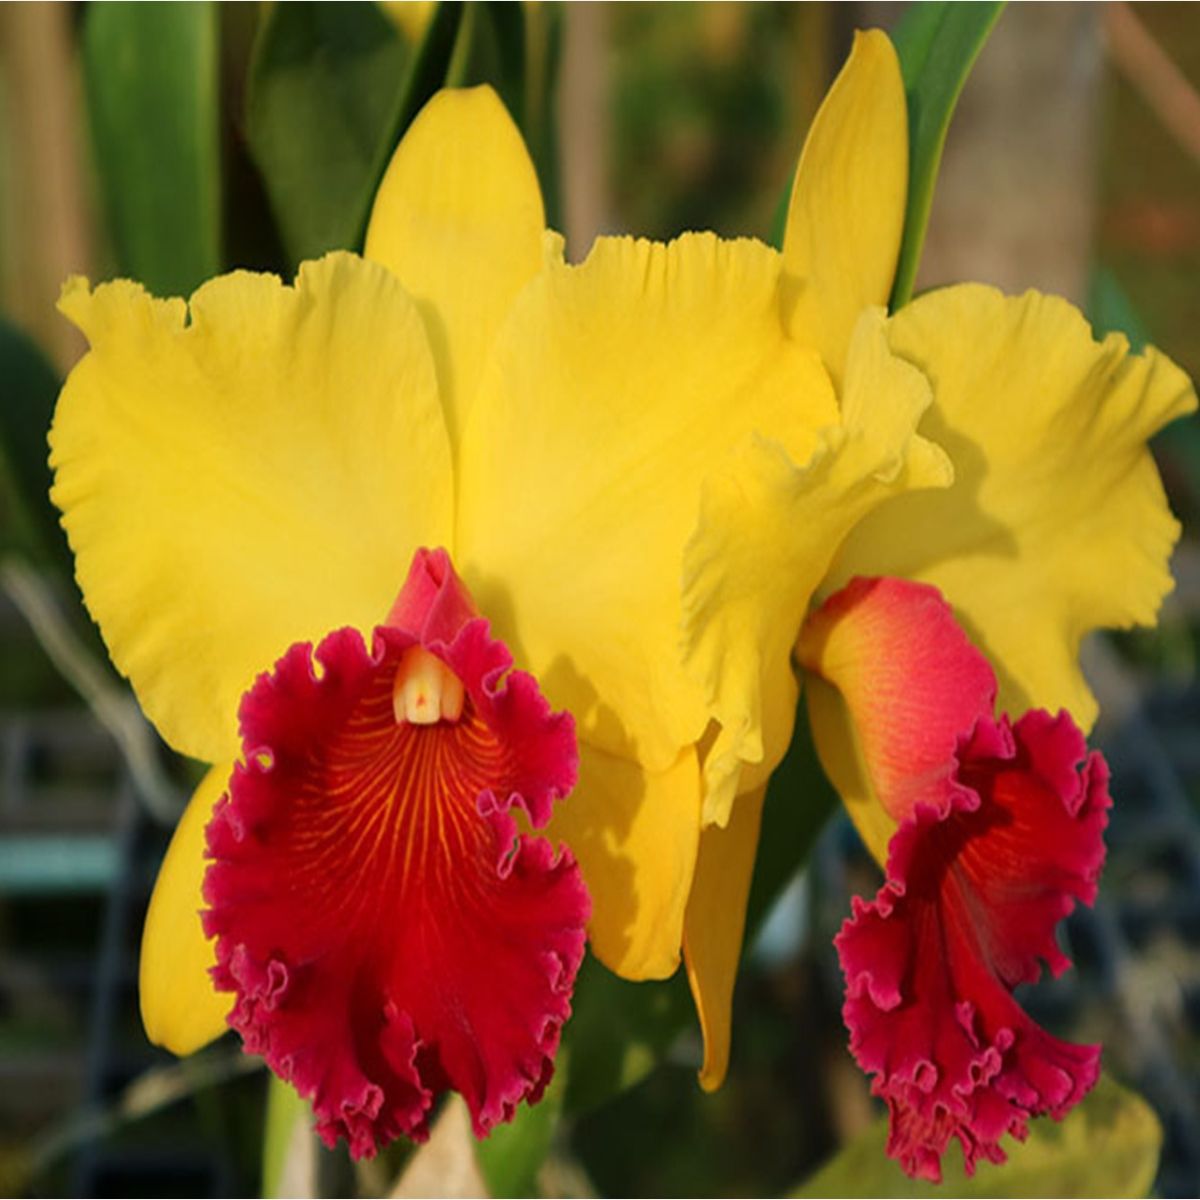 Rhyncholaeliocattleya Alma Kee Orchid - Exquisite Blooms with Vibrant Colors